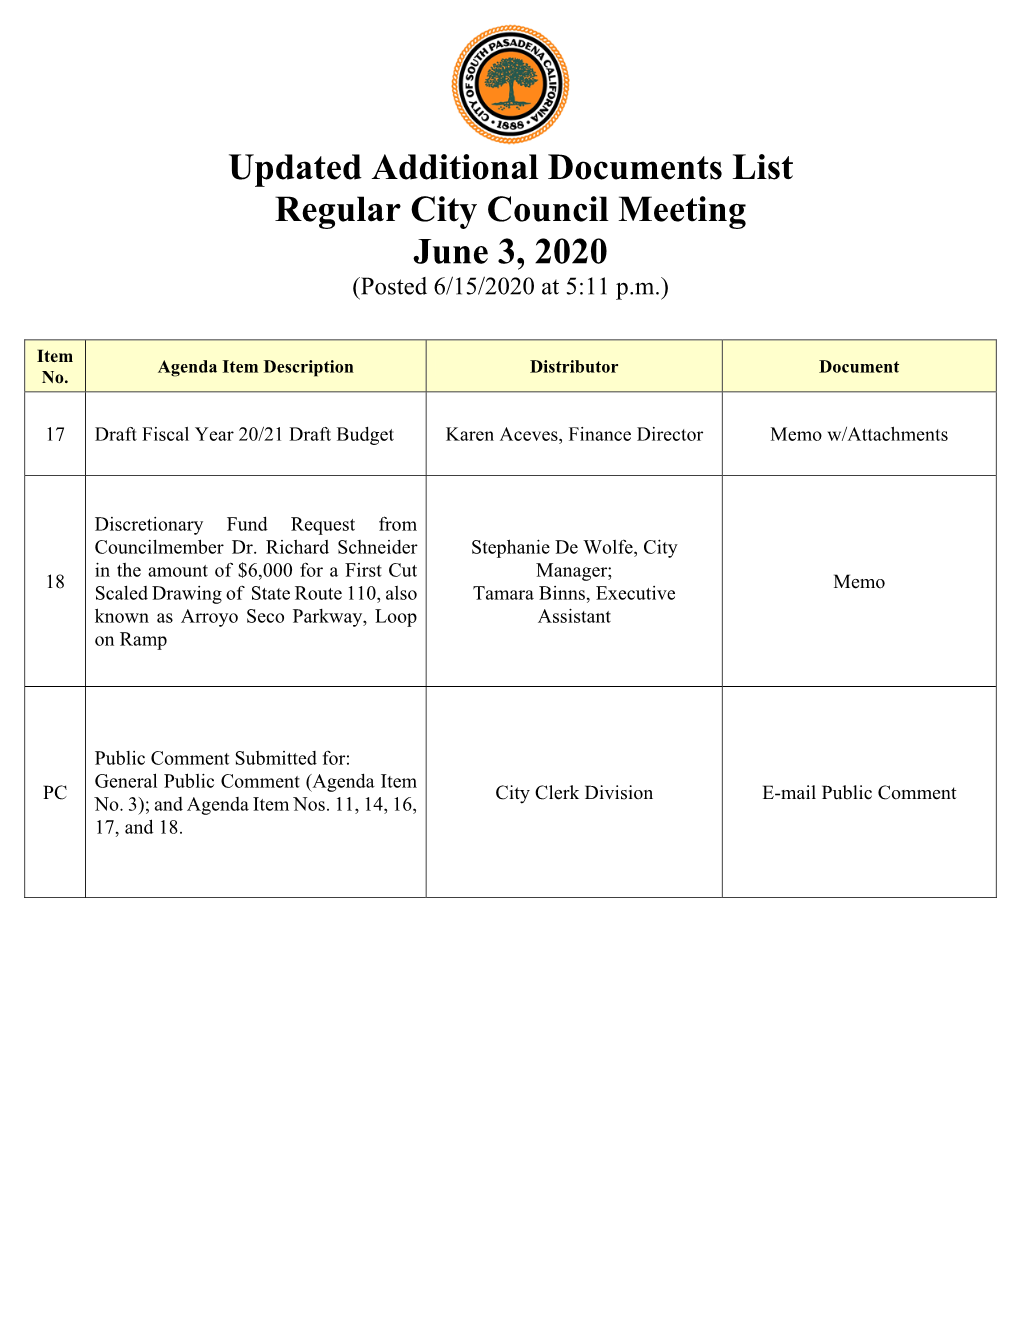 Updated Additional Documents List Regular City Council Meeting June 3, 2020 (Posted 6/15/2020 at 5:11 P.M.)